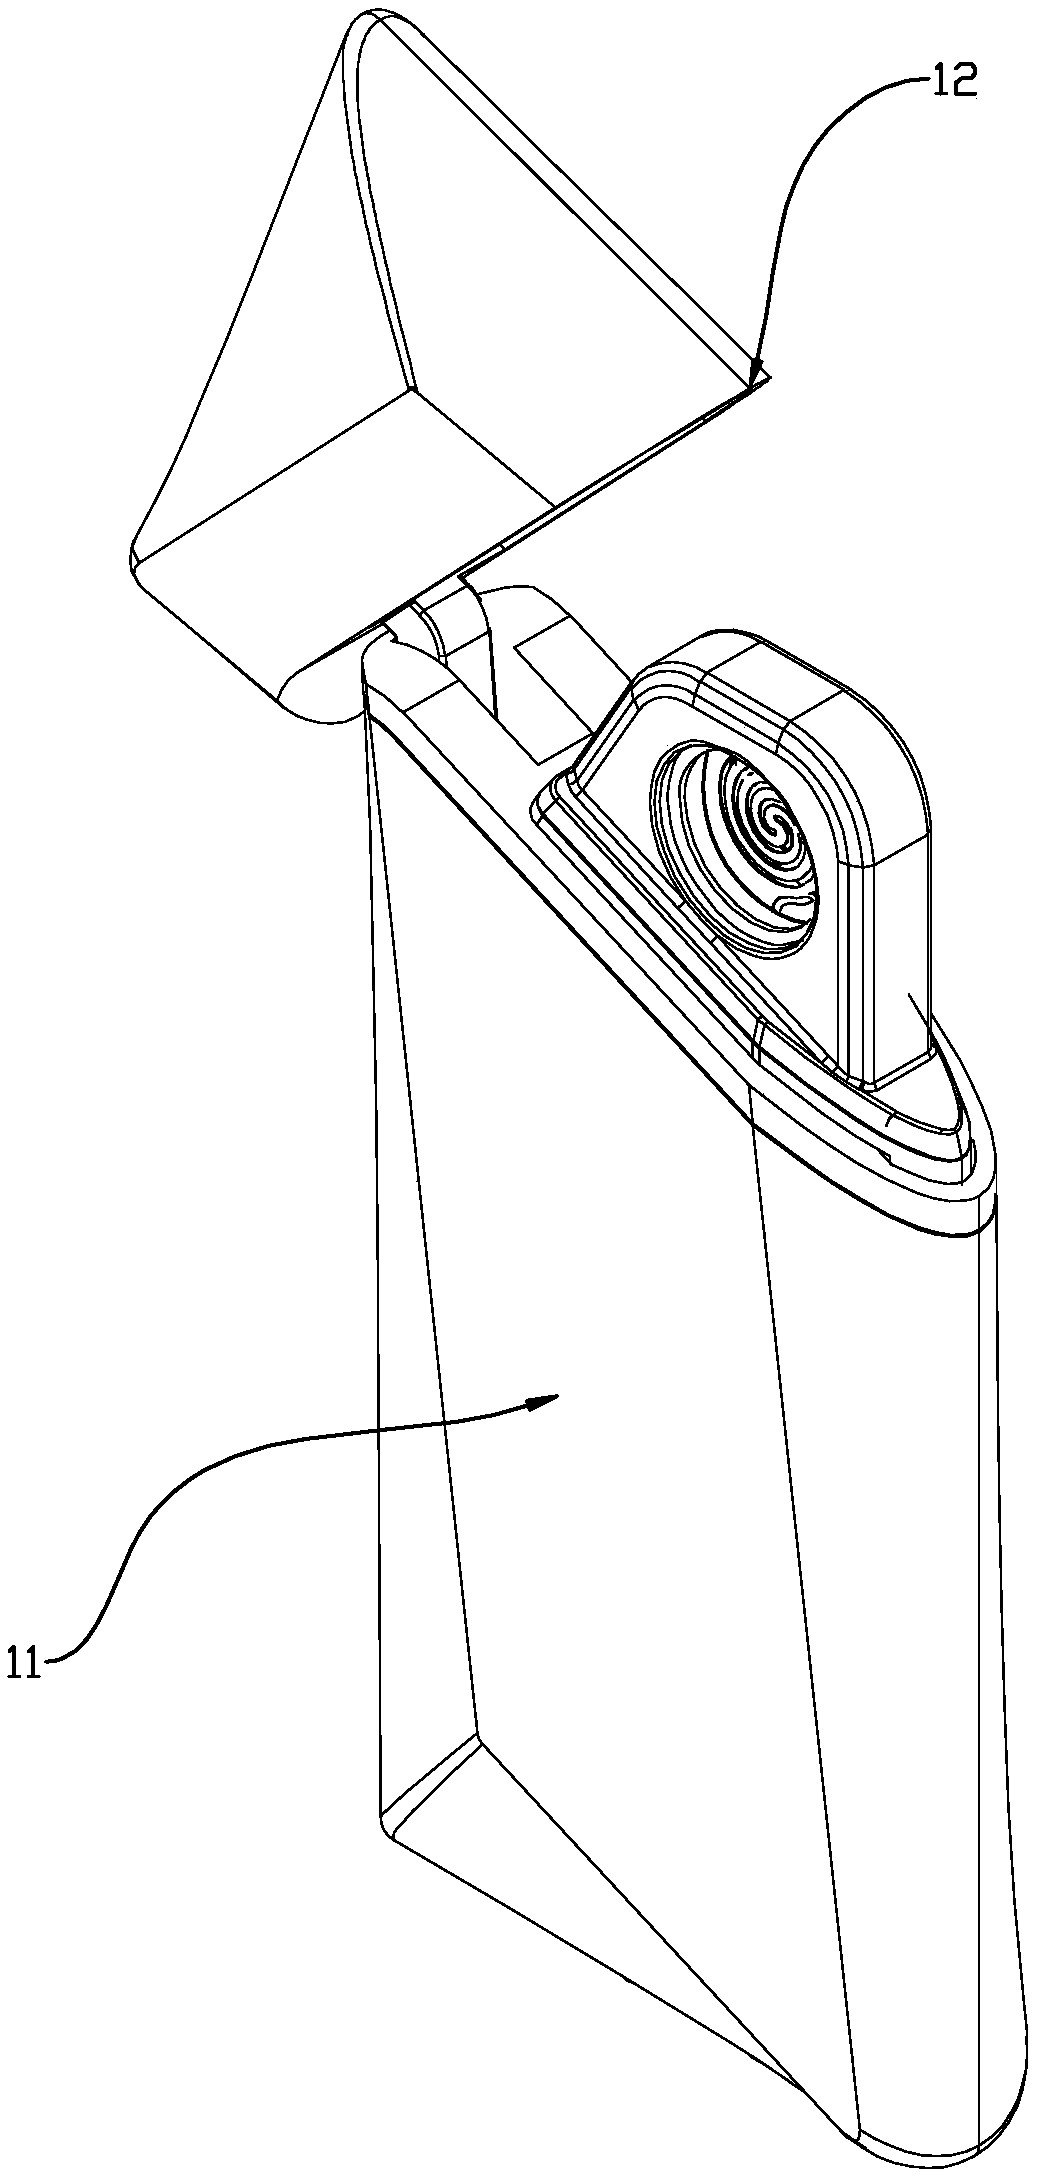 A cigarette lighter with an easy-to-replace electric heating unit